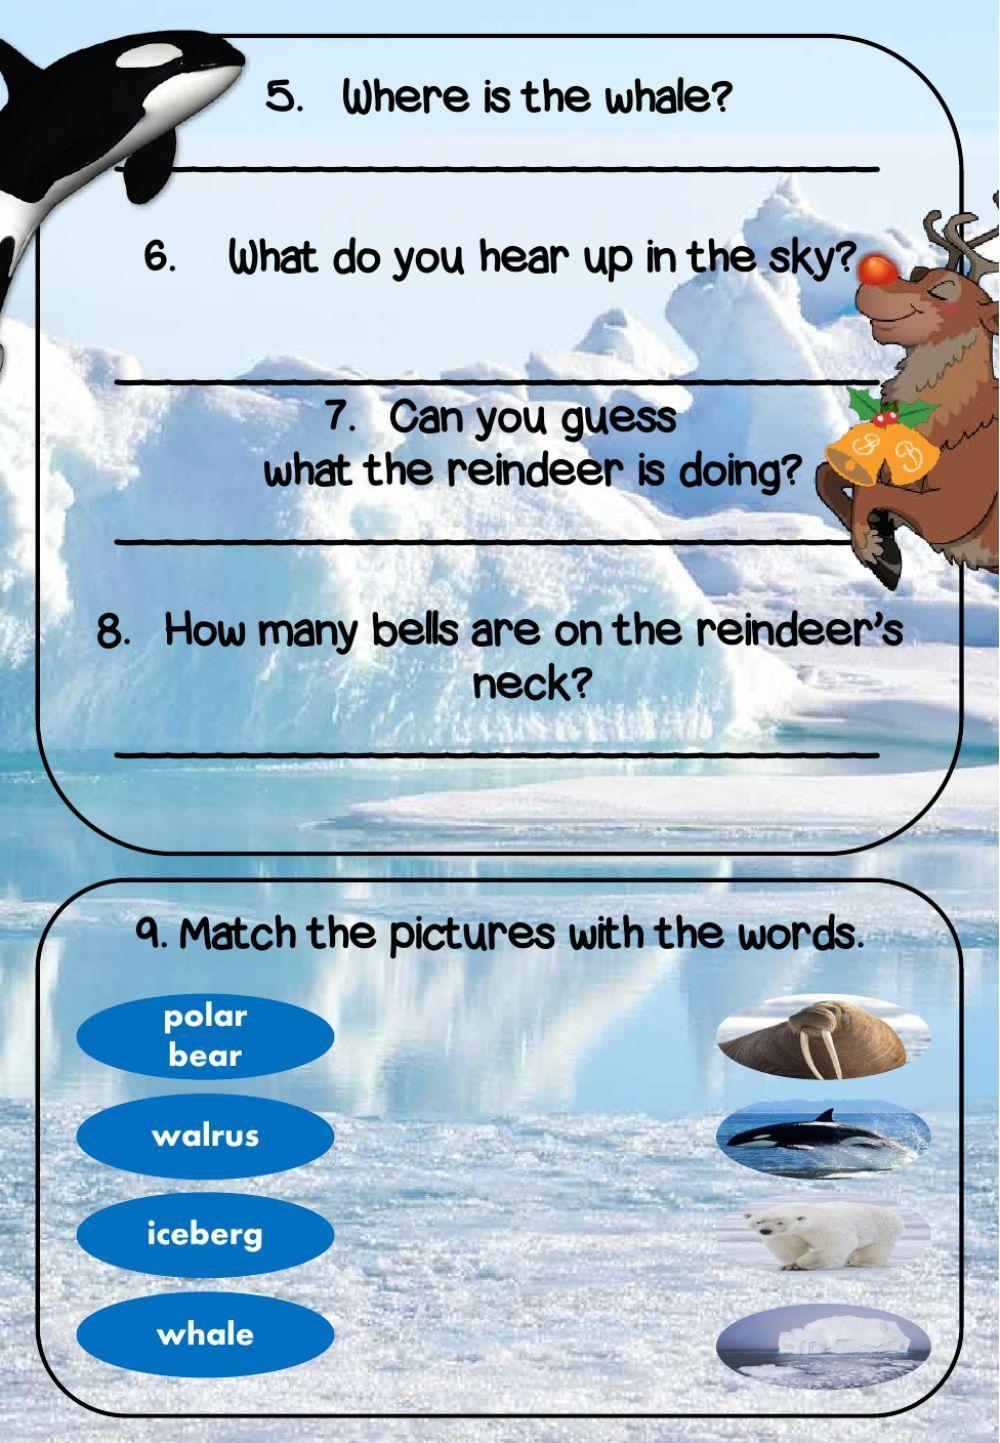 ''Welcome to The North Pole'' - Reading Comprehension